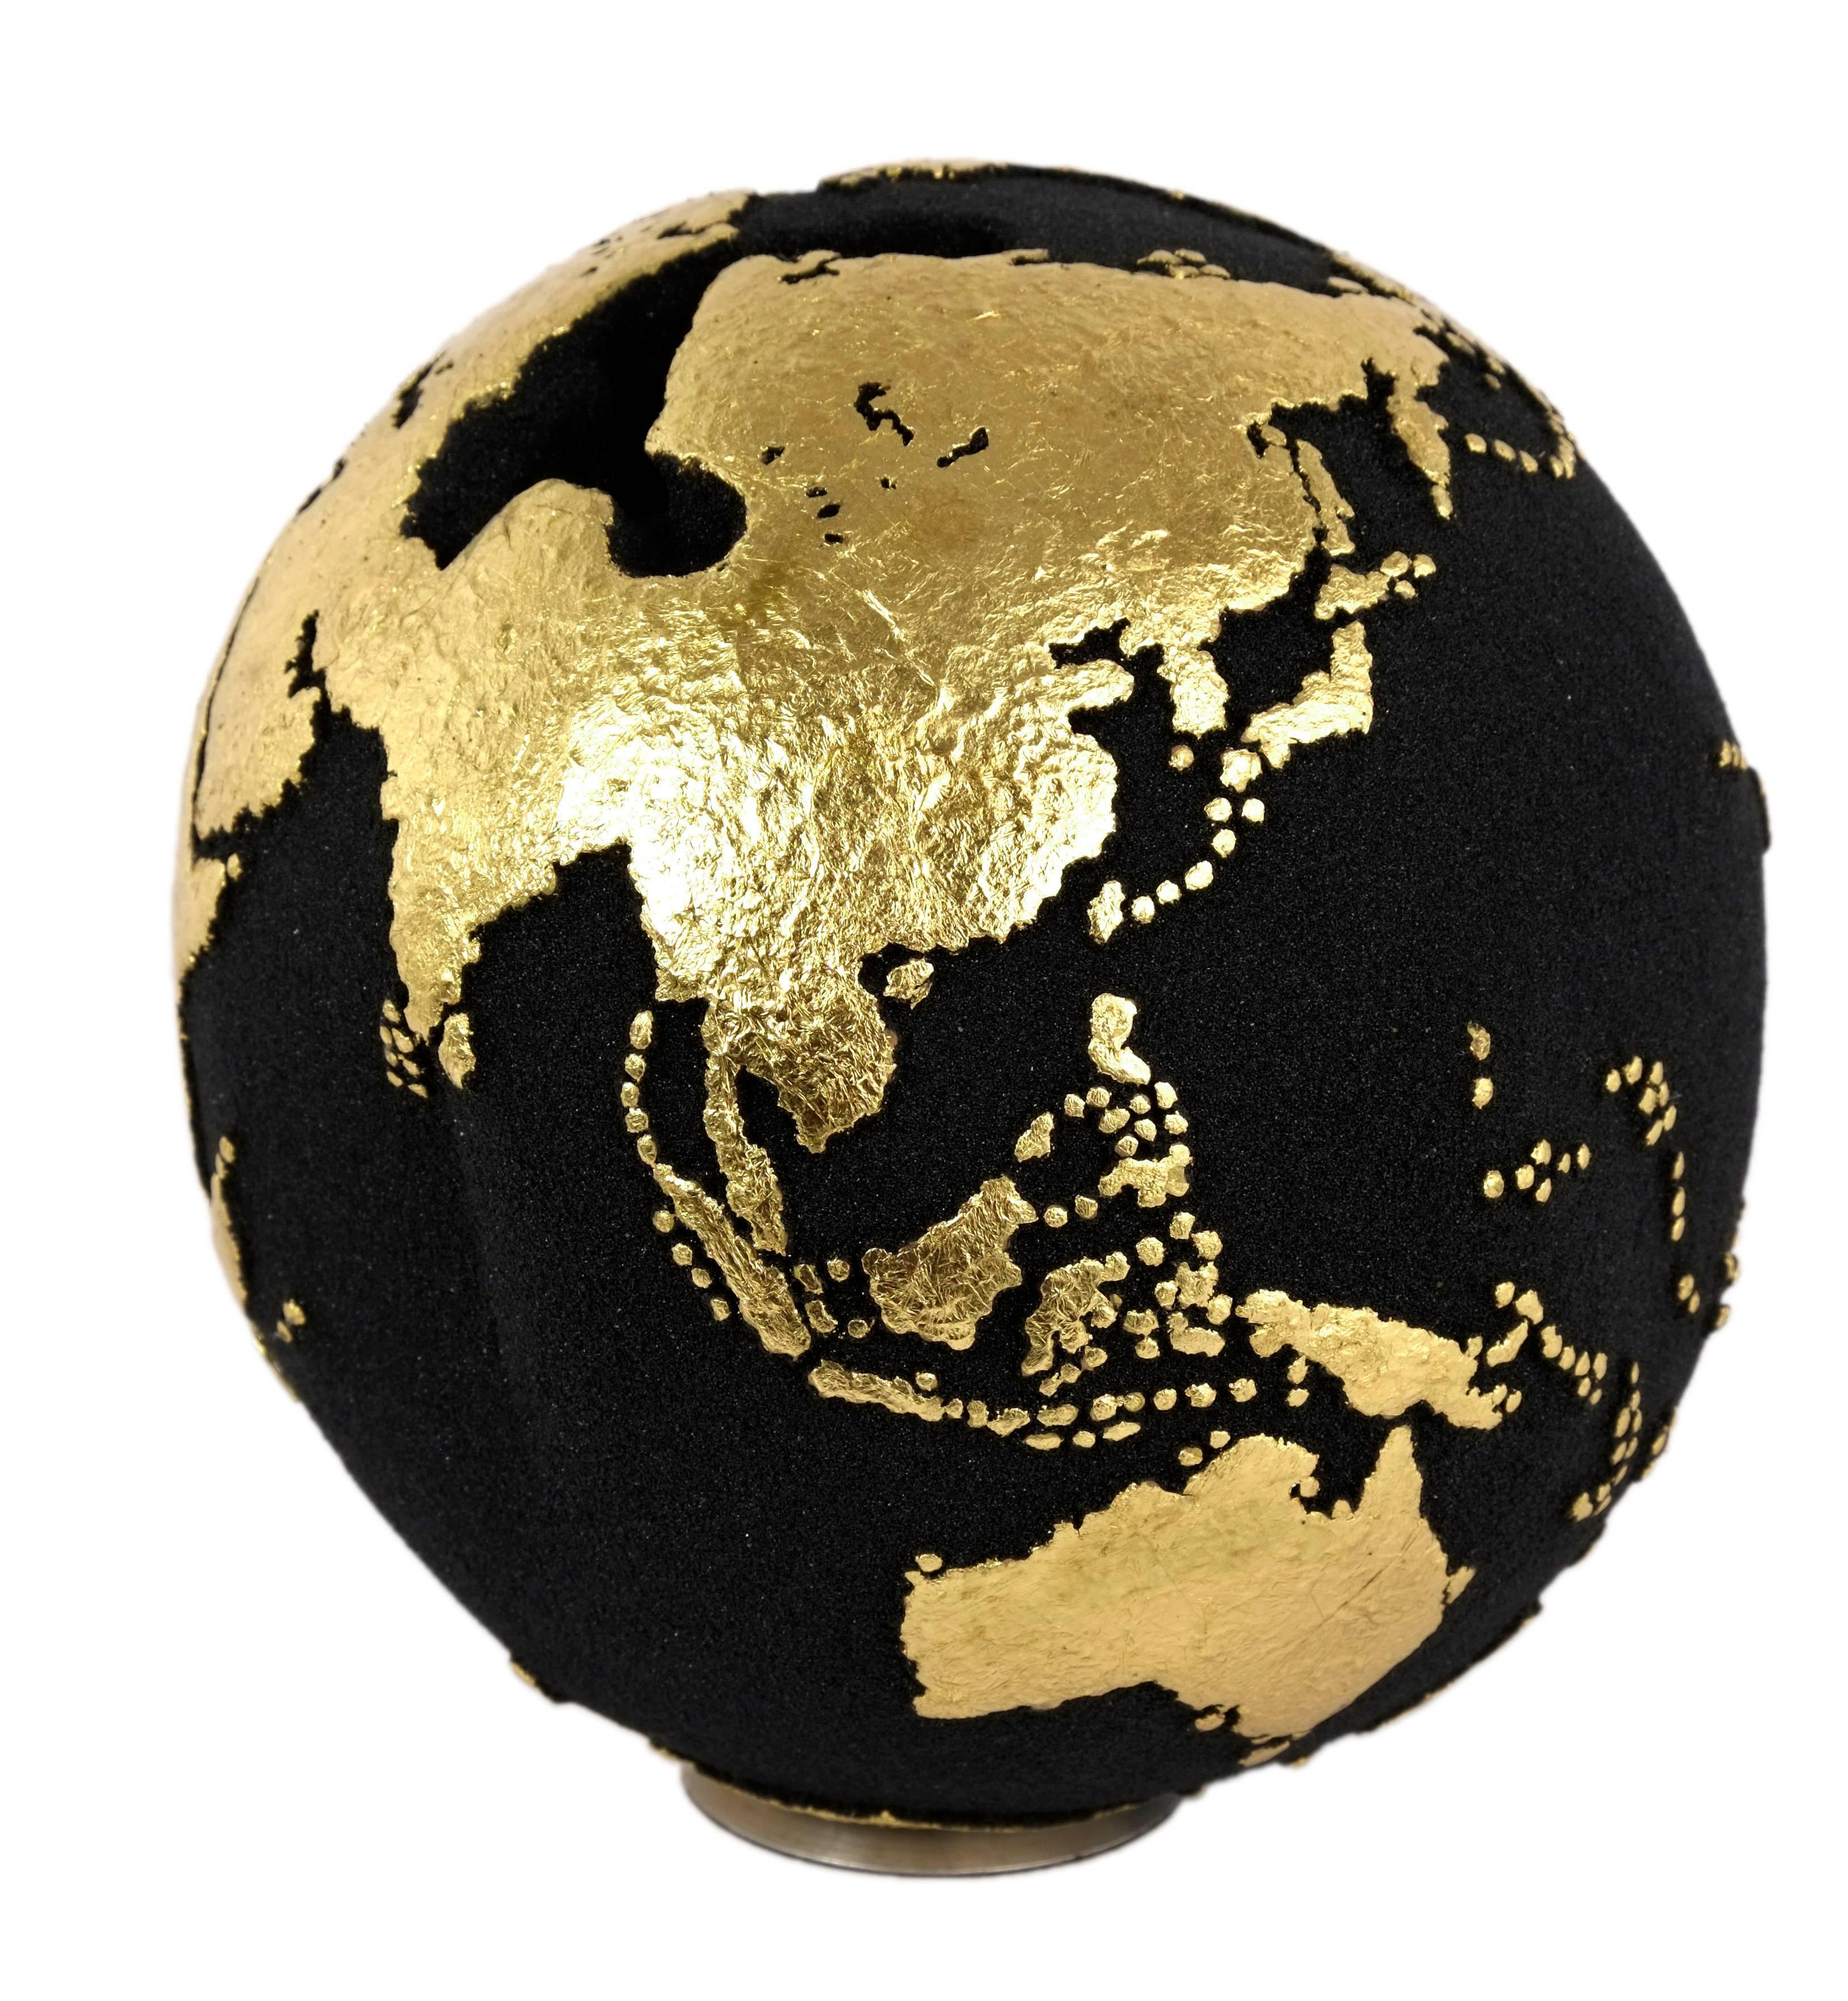 Organic Modern Classic Globe with Volcanic Sand and Gold Finishing, 20 cm